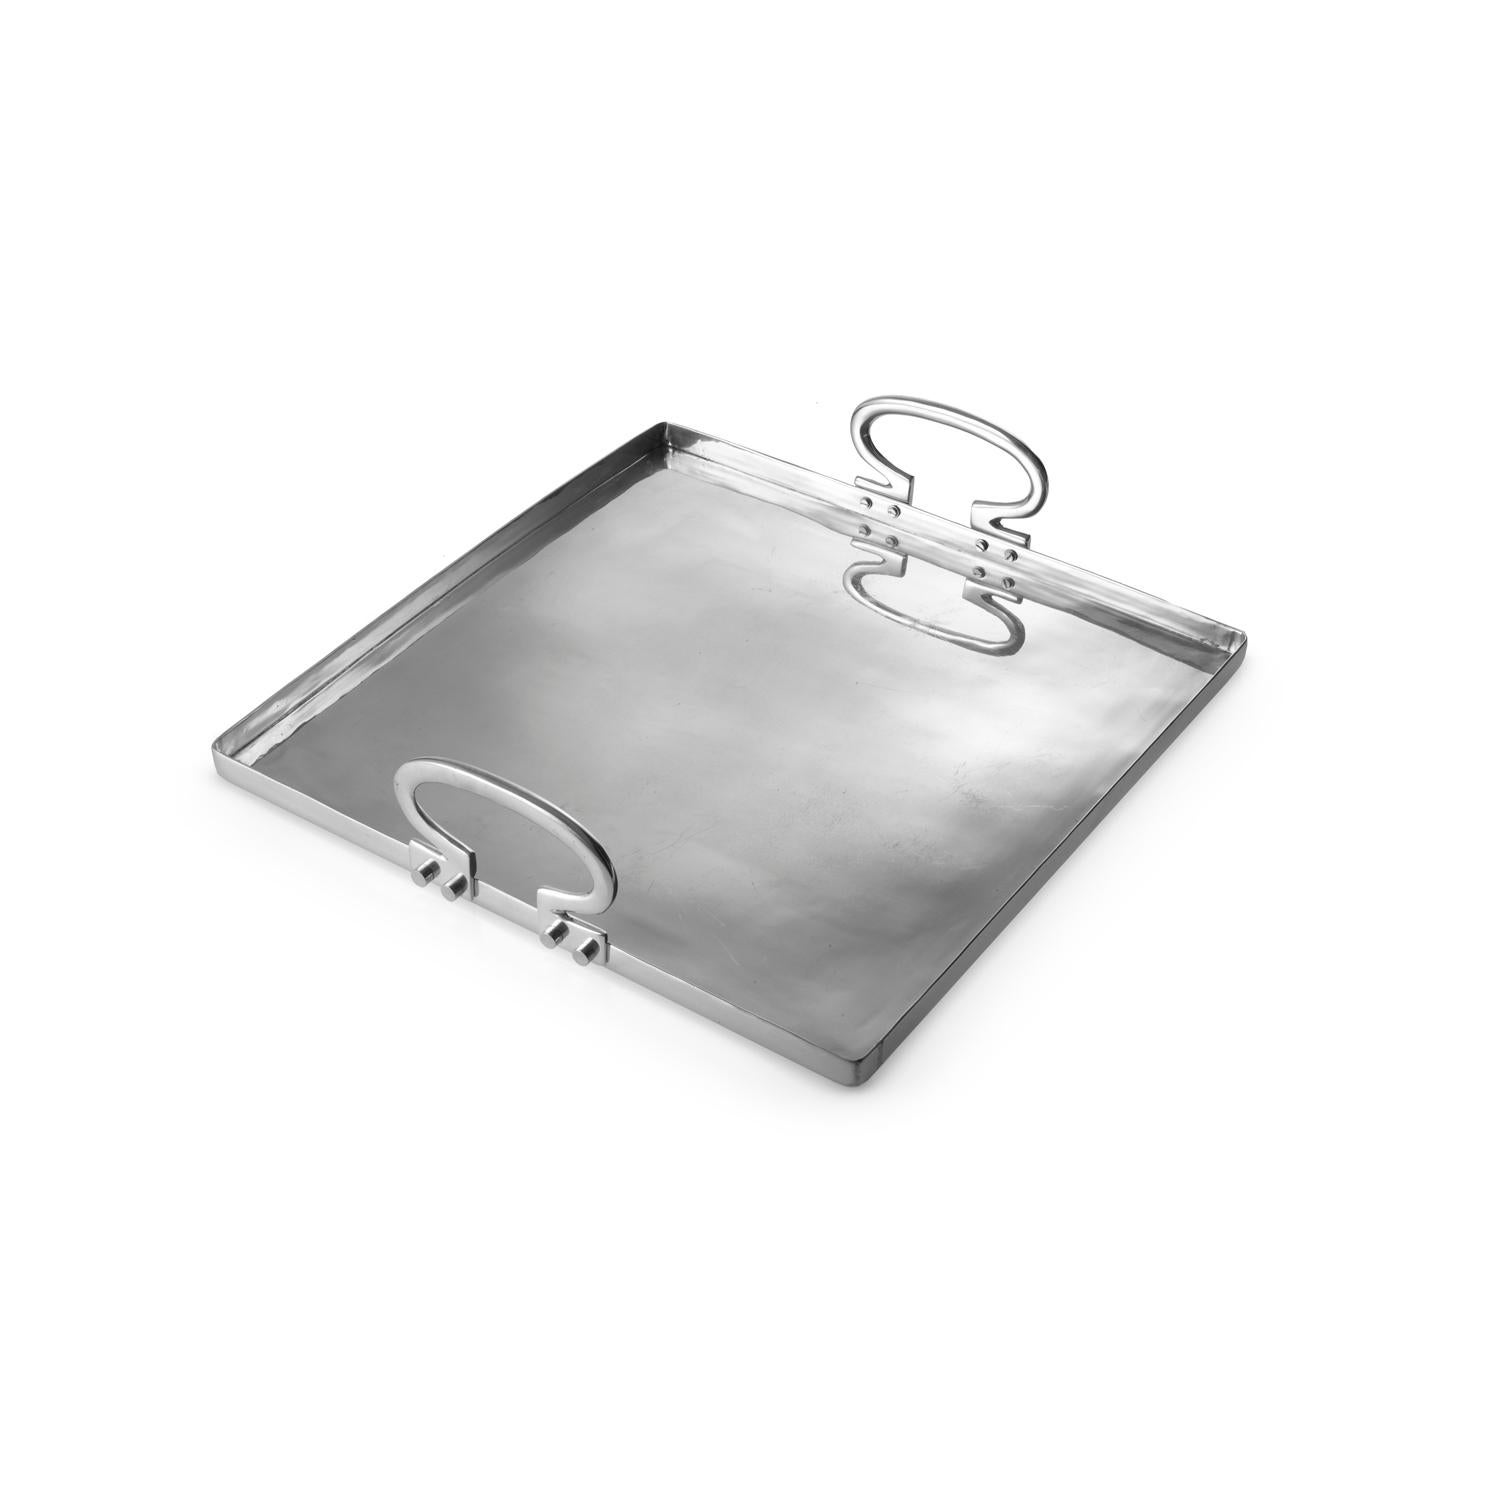 Colony is a polished aluminium tray designed by Aldo Cibic. The square Silhouette is Minimalist, but the rounded corners and the sinuous handles give to the object a warm and refined look. Colony is perfect on any occasion to serve drinks or food